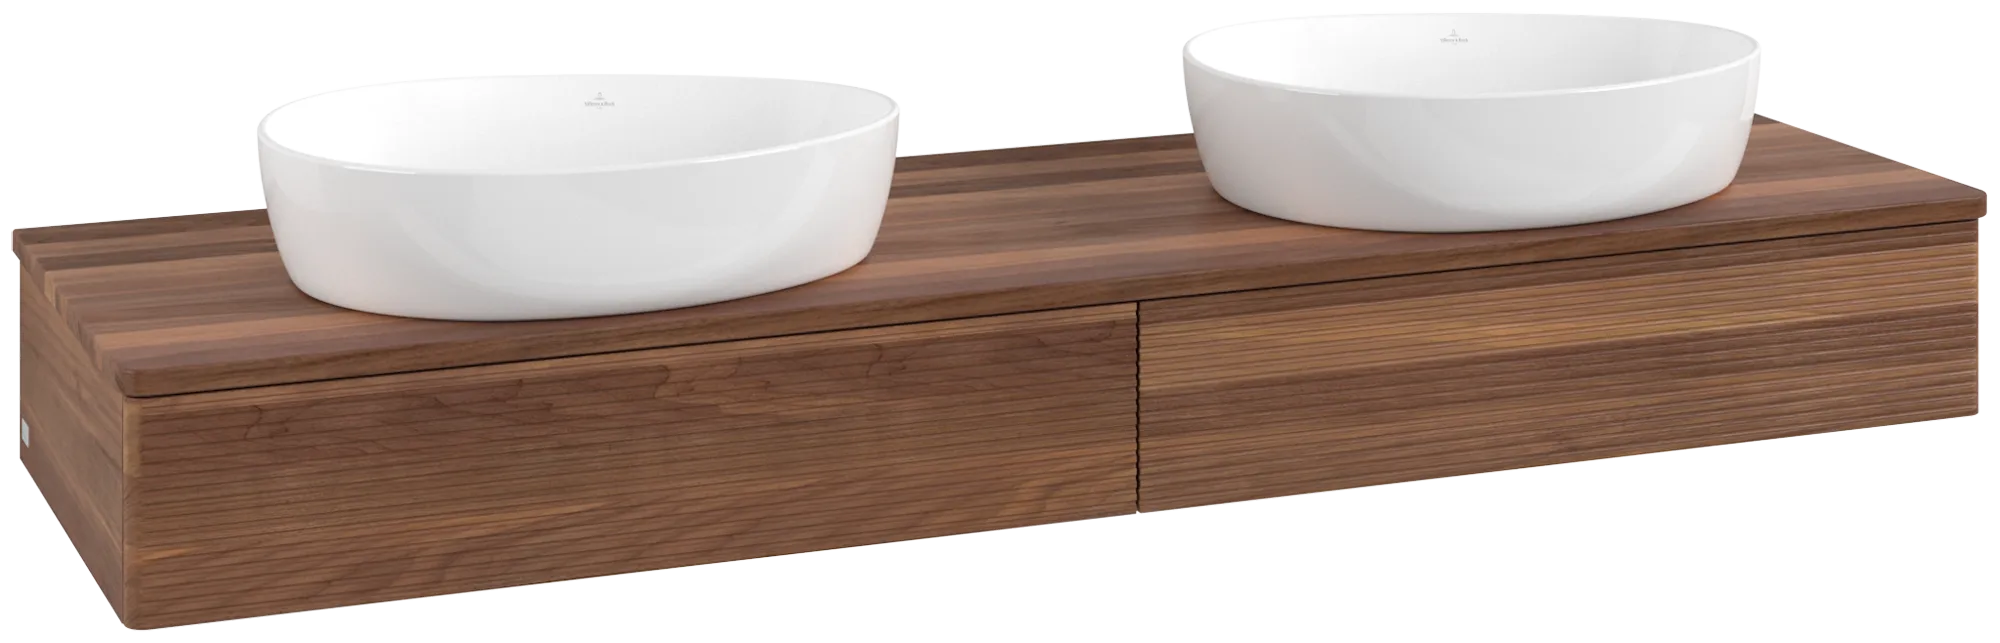 VILLEROY BOCH Antao Vanity unit, 2 pull-out compartments, 1600 x 190 x 500 mm, Front with grain texture, Warm Walnut / Warm Walnut #K17112HM resmi